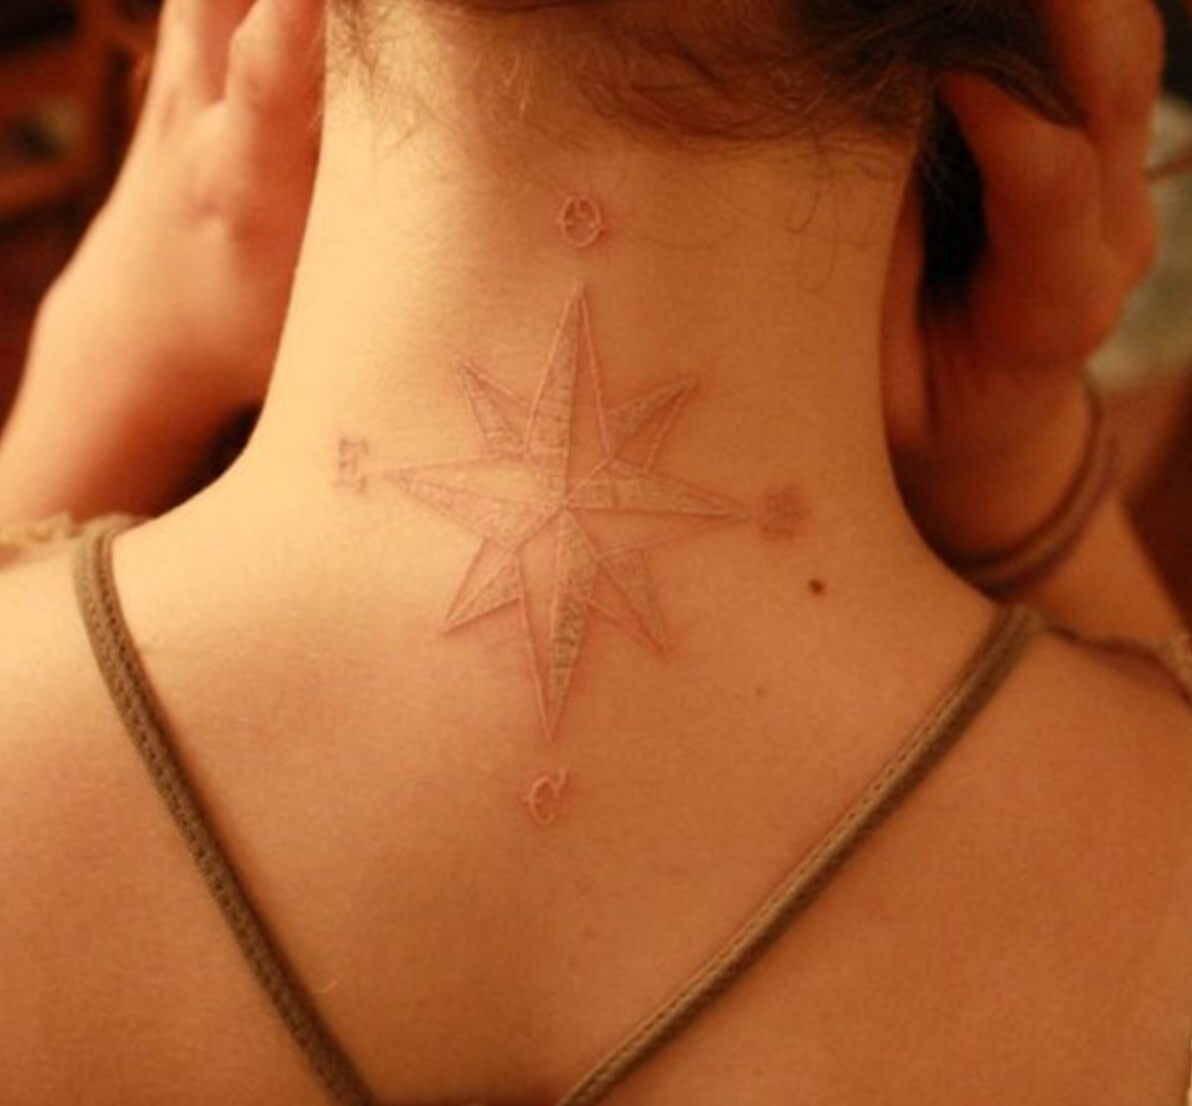 White ink tattoo in the form of a wind rose placed on the neck